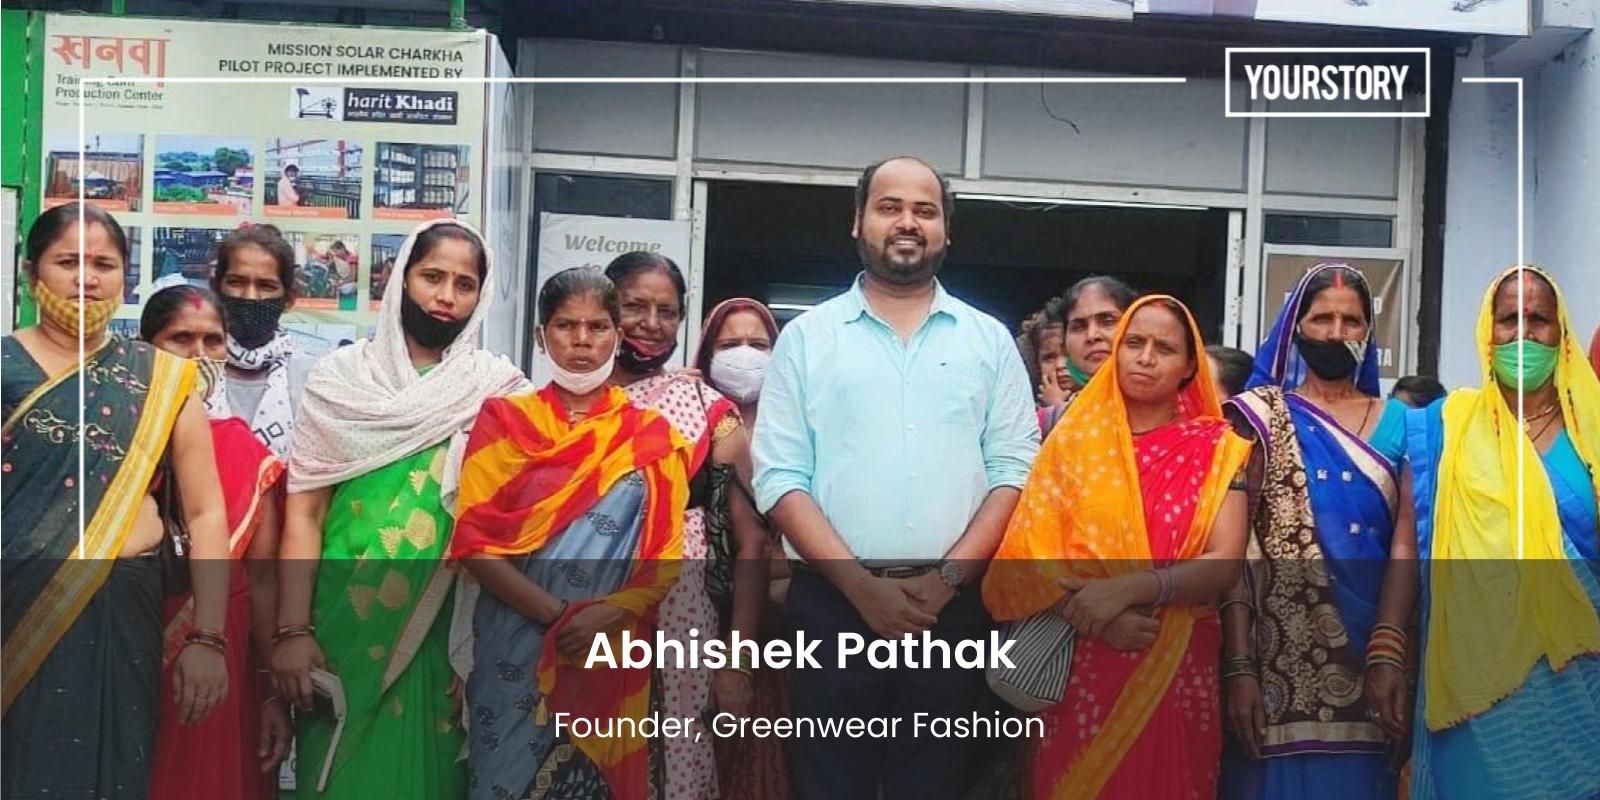 [Startup Bharat] This textile designer has created a sustainable clothing brand by harnessing the power of sun